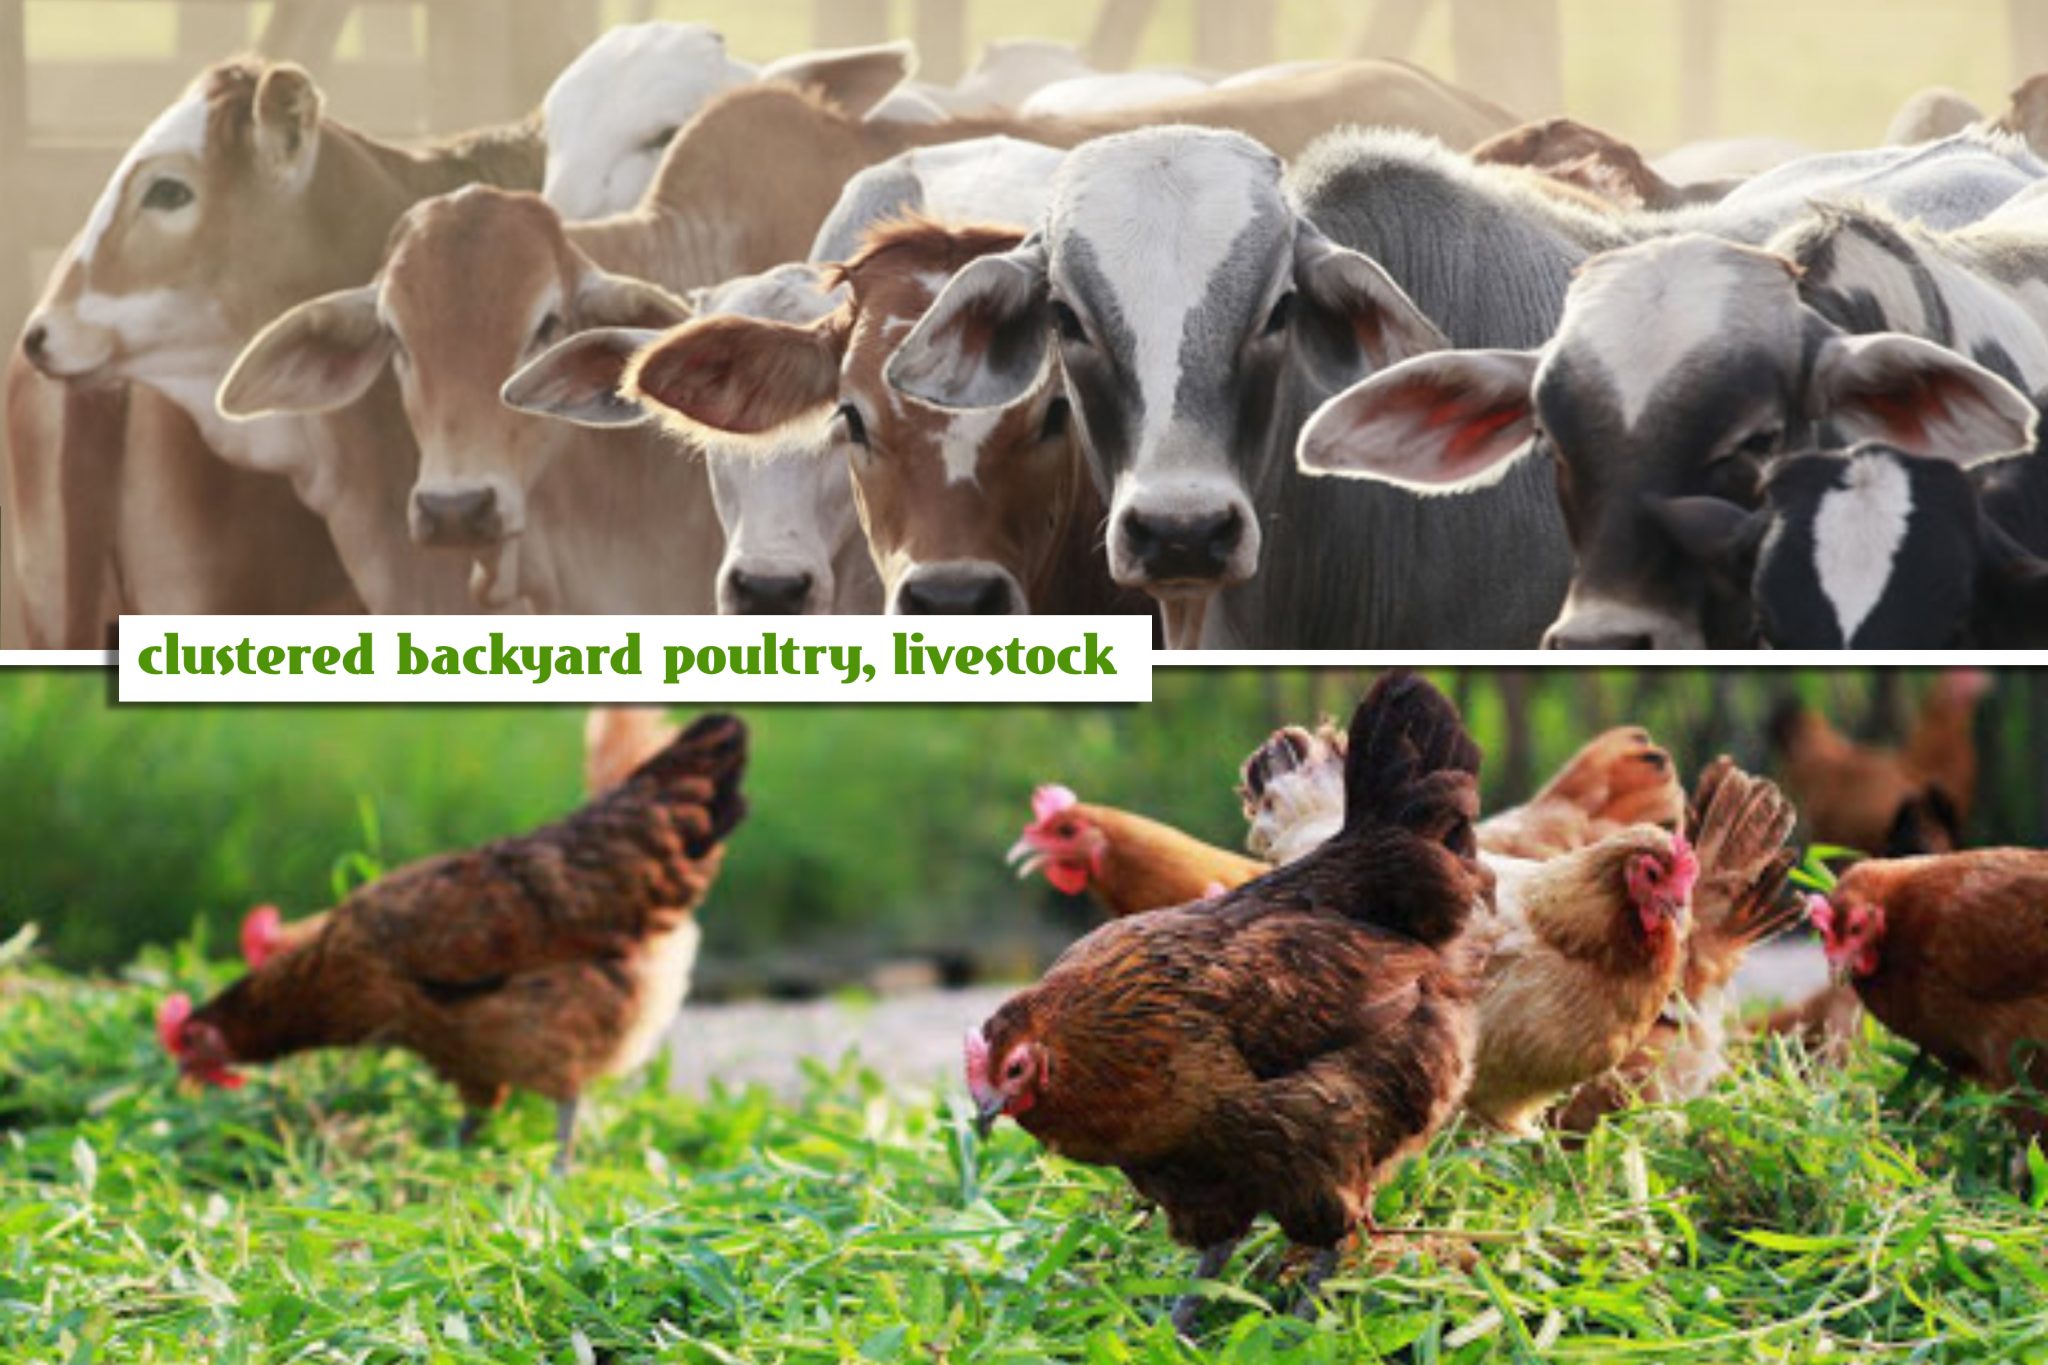 DA to support clustered backyard poultry, livestock farms